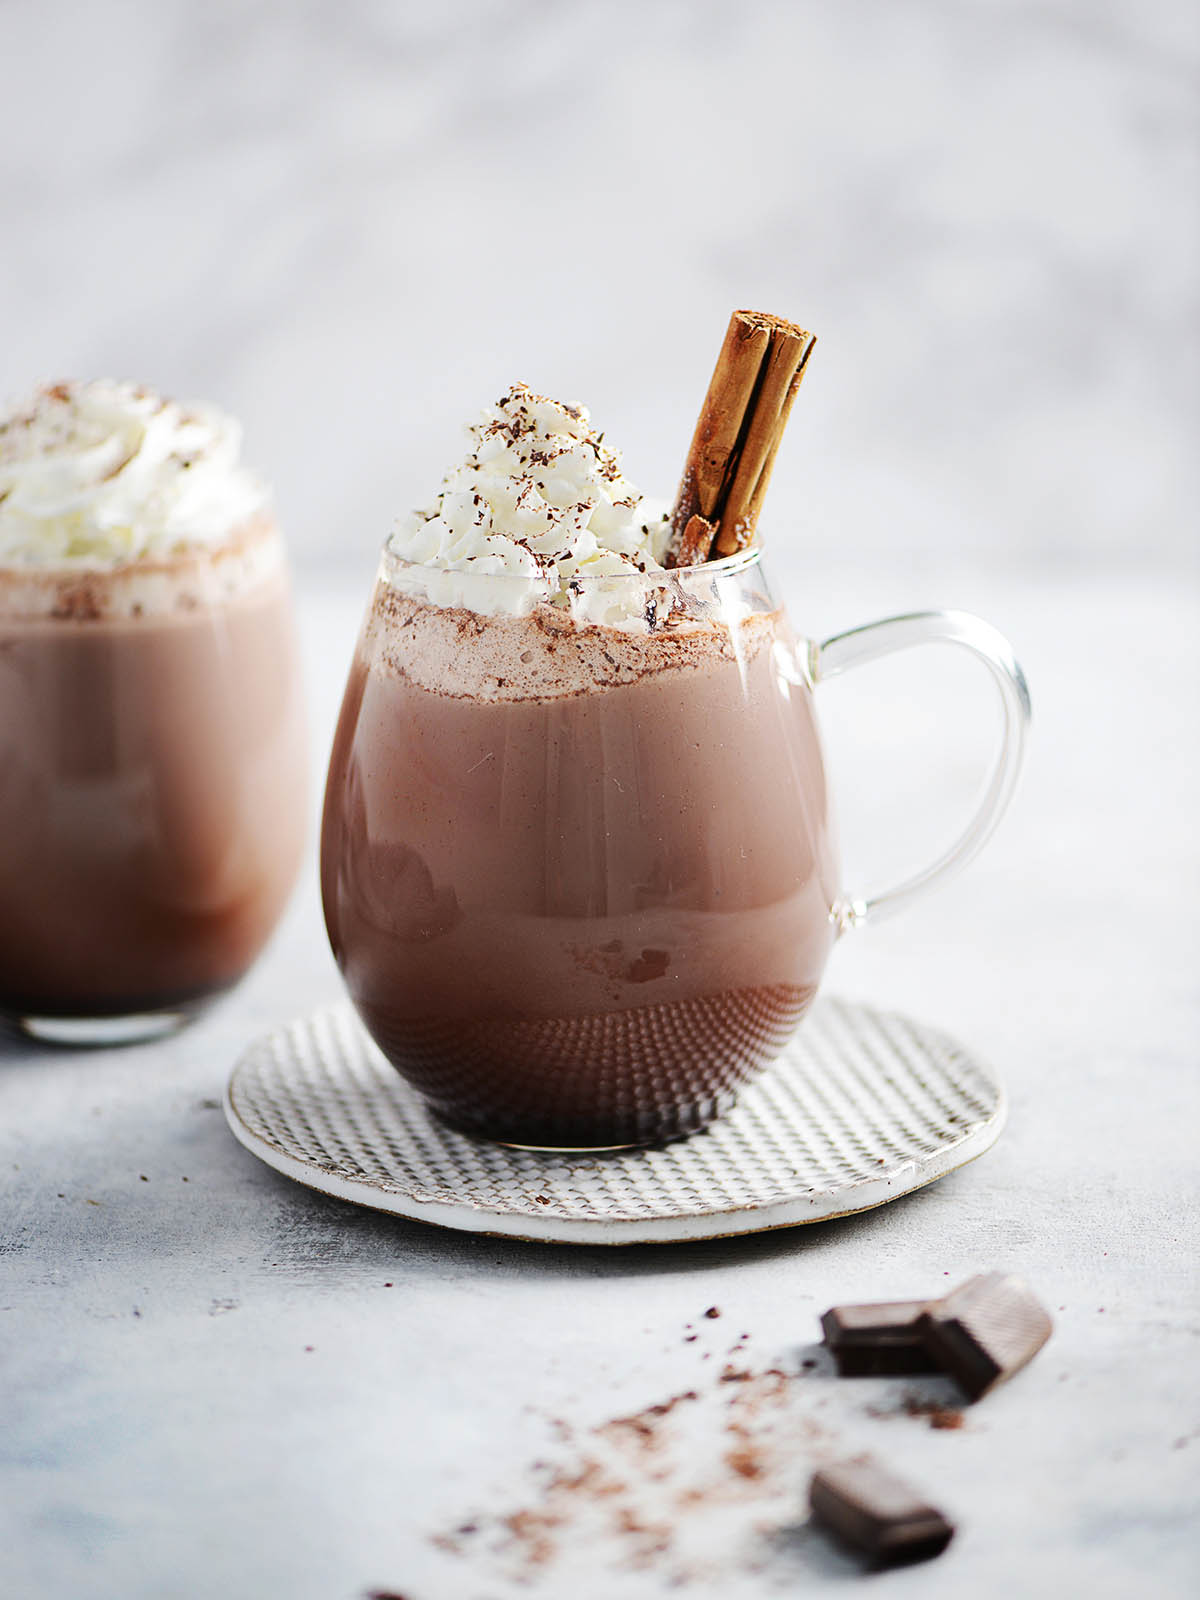 Two clear mugs with hot chocolate and whipped cream.